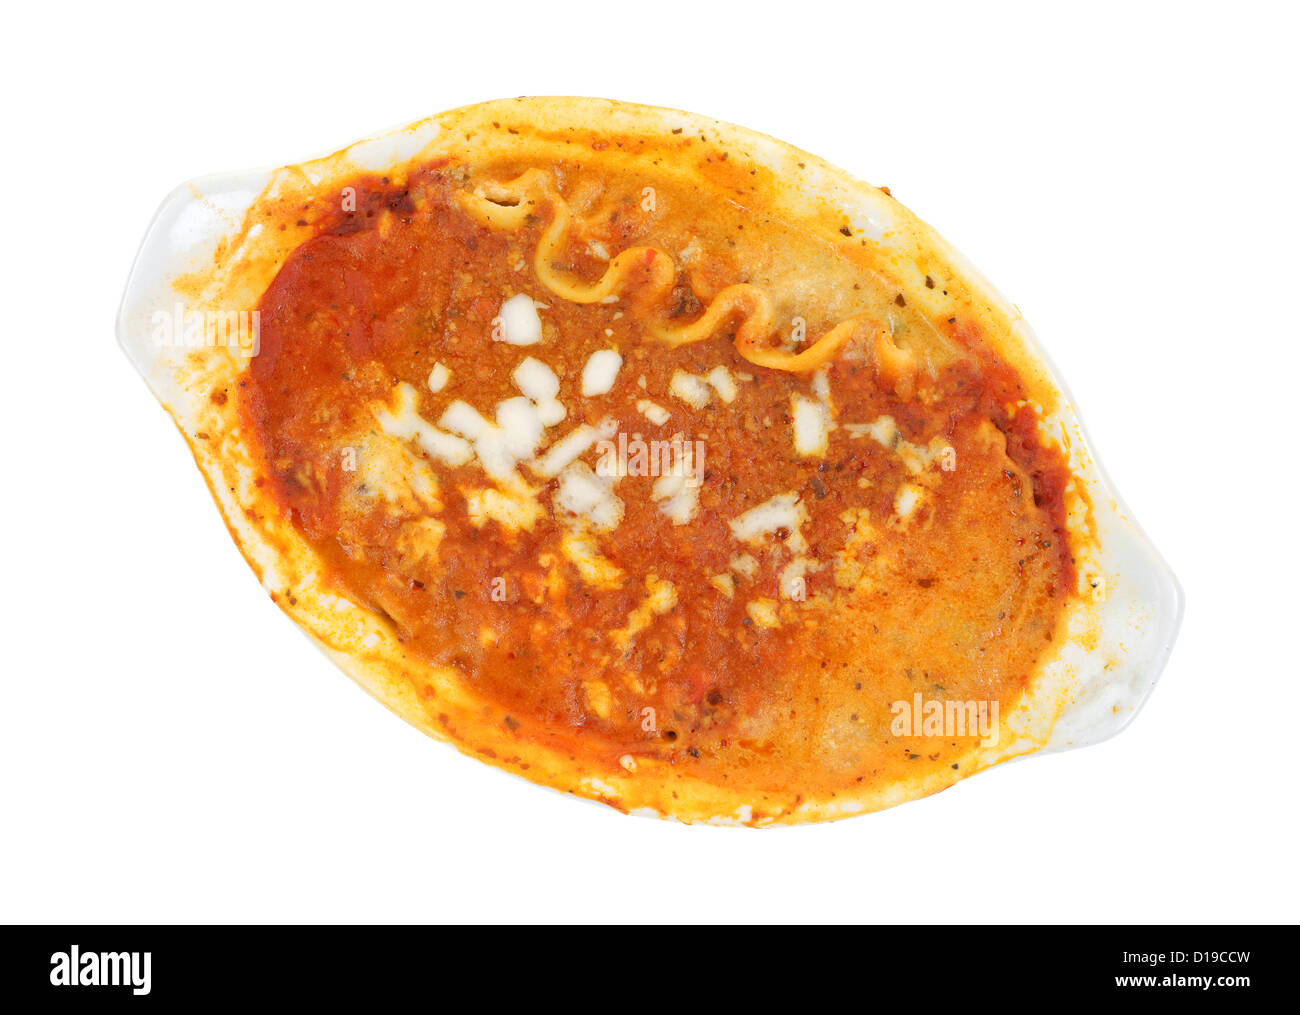 Top view of a small serving of microwaved lasagna in a baking dish with tomato sauce around the rim on a white background. Stock Photo